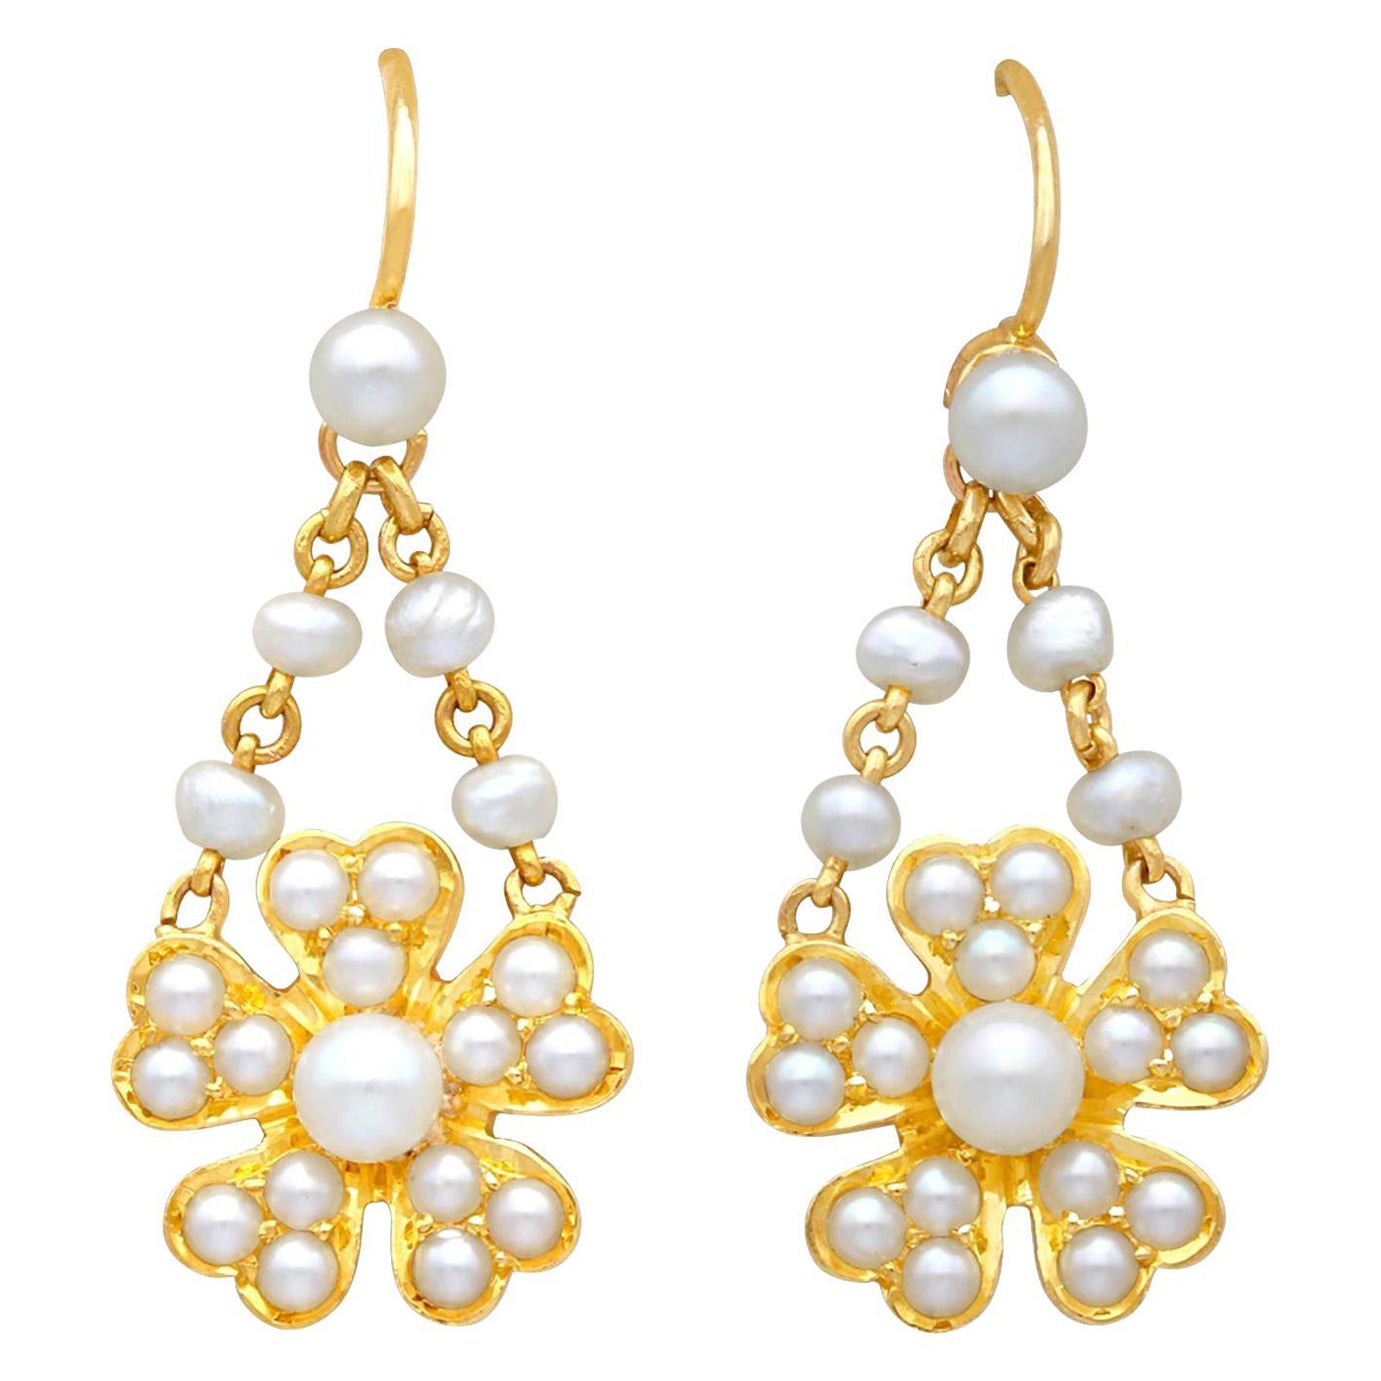 Antique Seed Pearl and 18k Yellow Gold Drop Earrings, Circa 1890